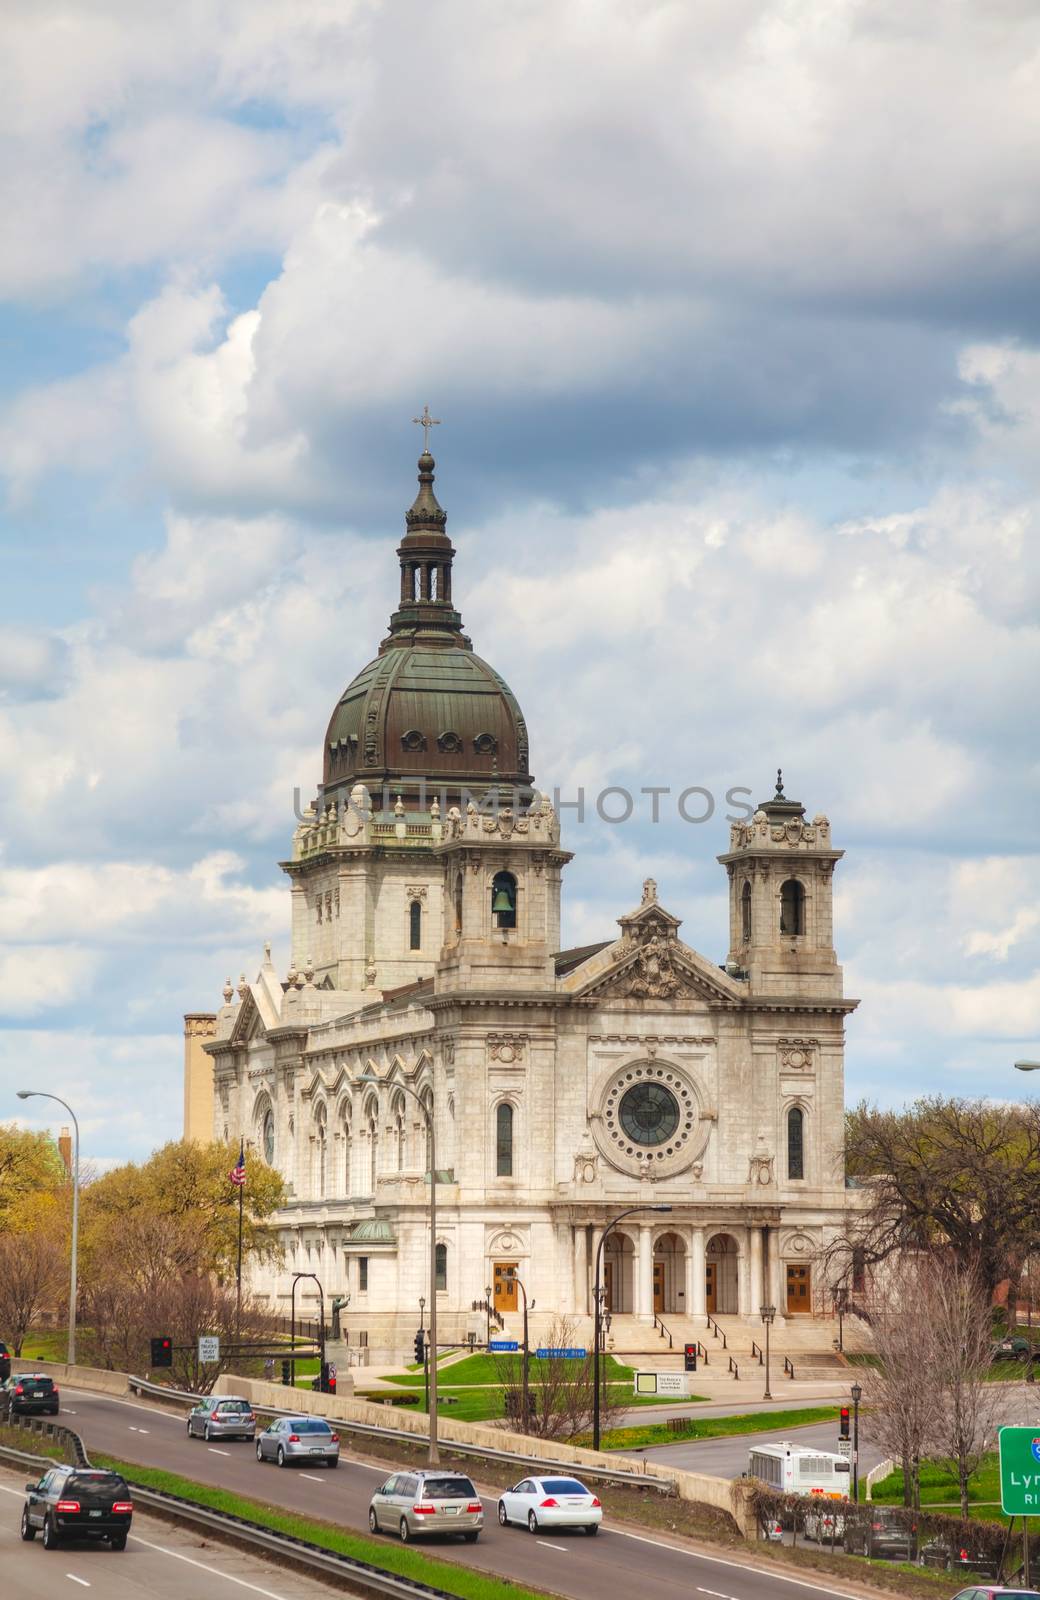 Basilica of Saint Mary in Minneapolis, MN by AndreyKr